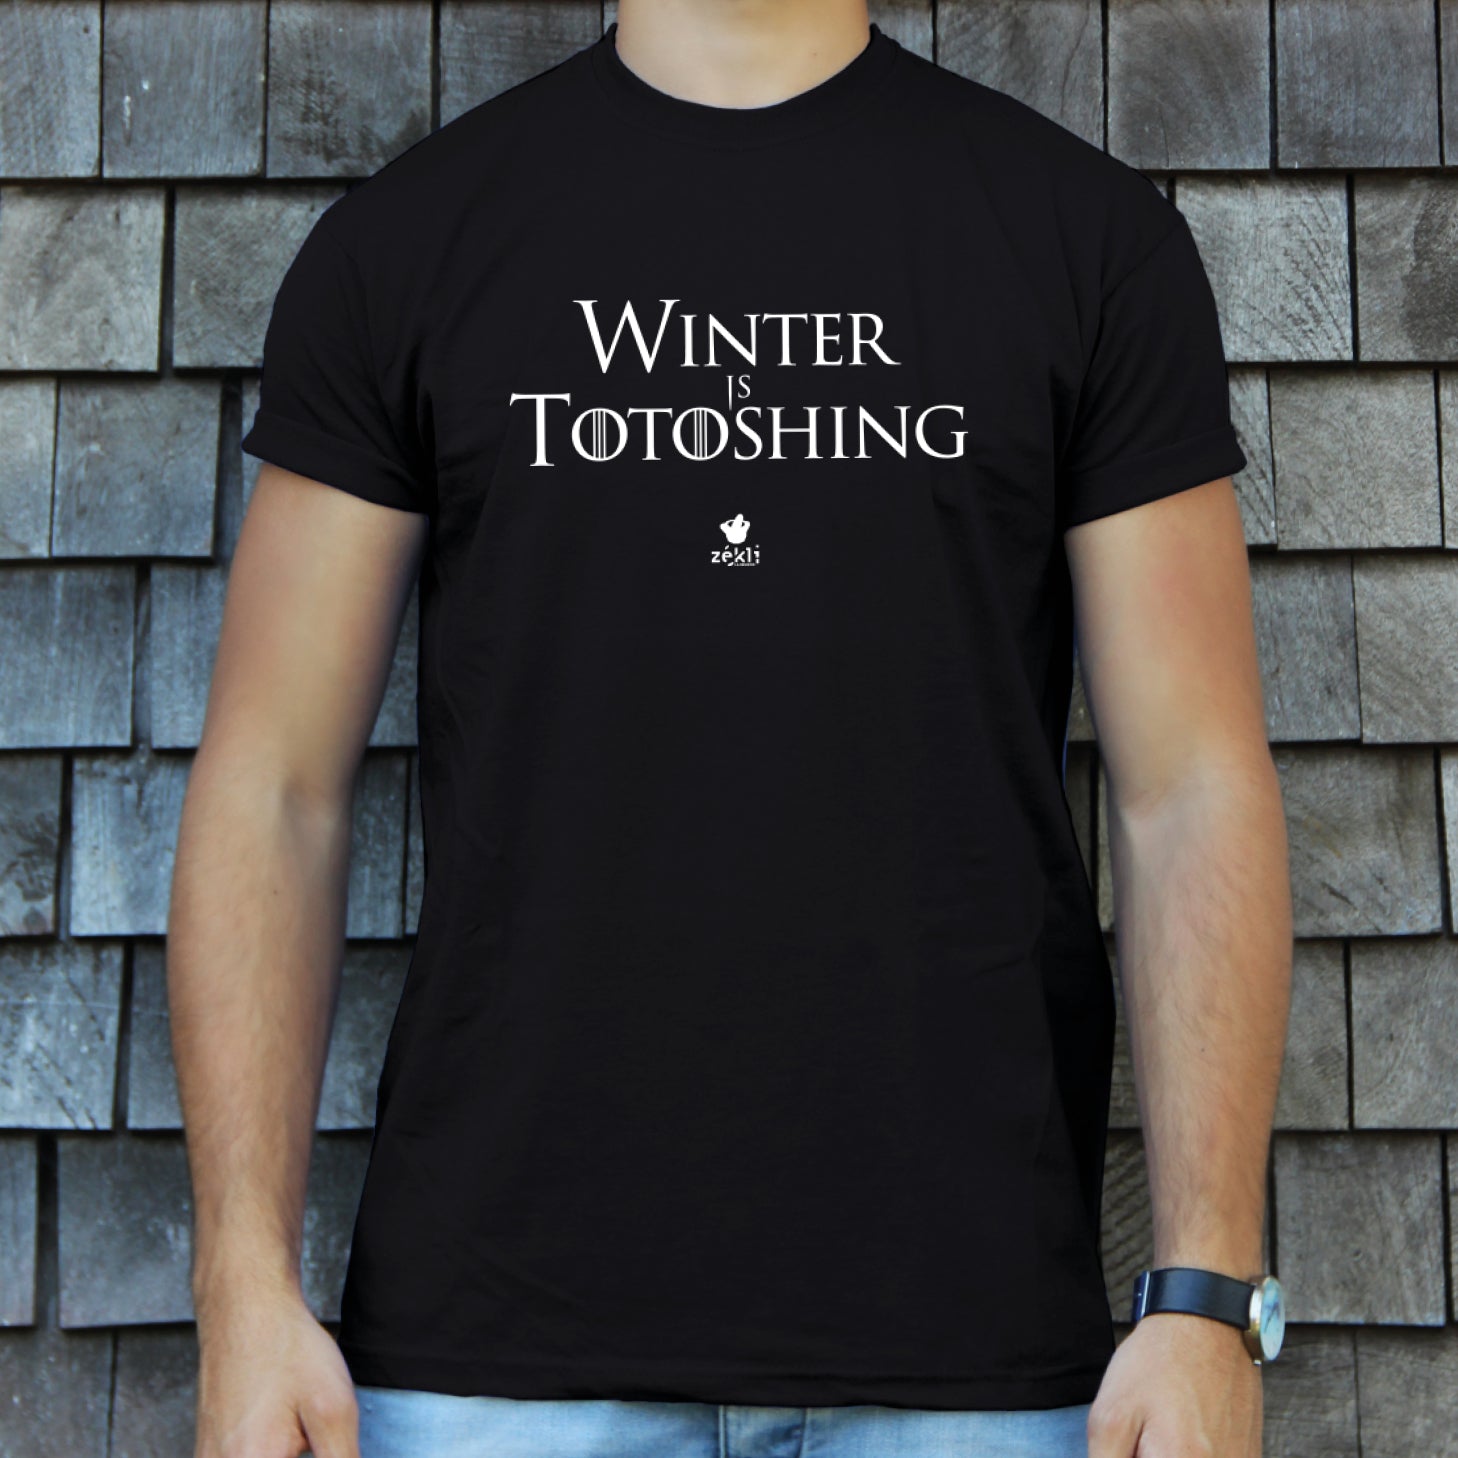 Winter is totoshing